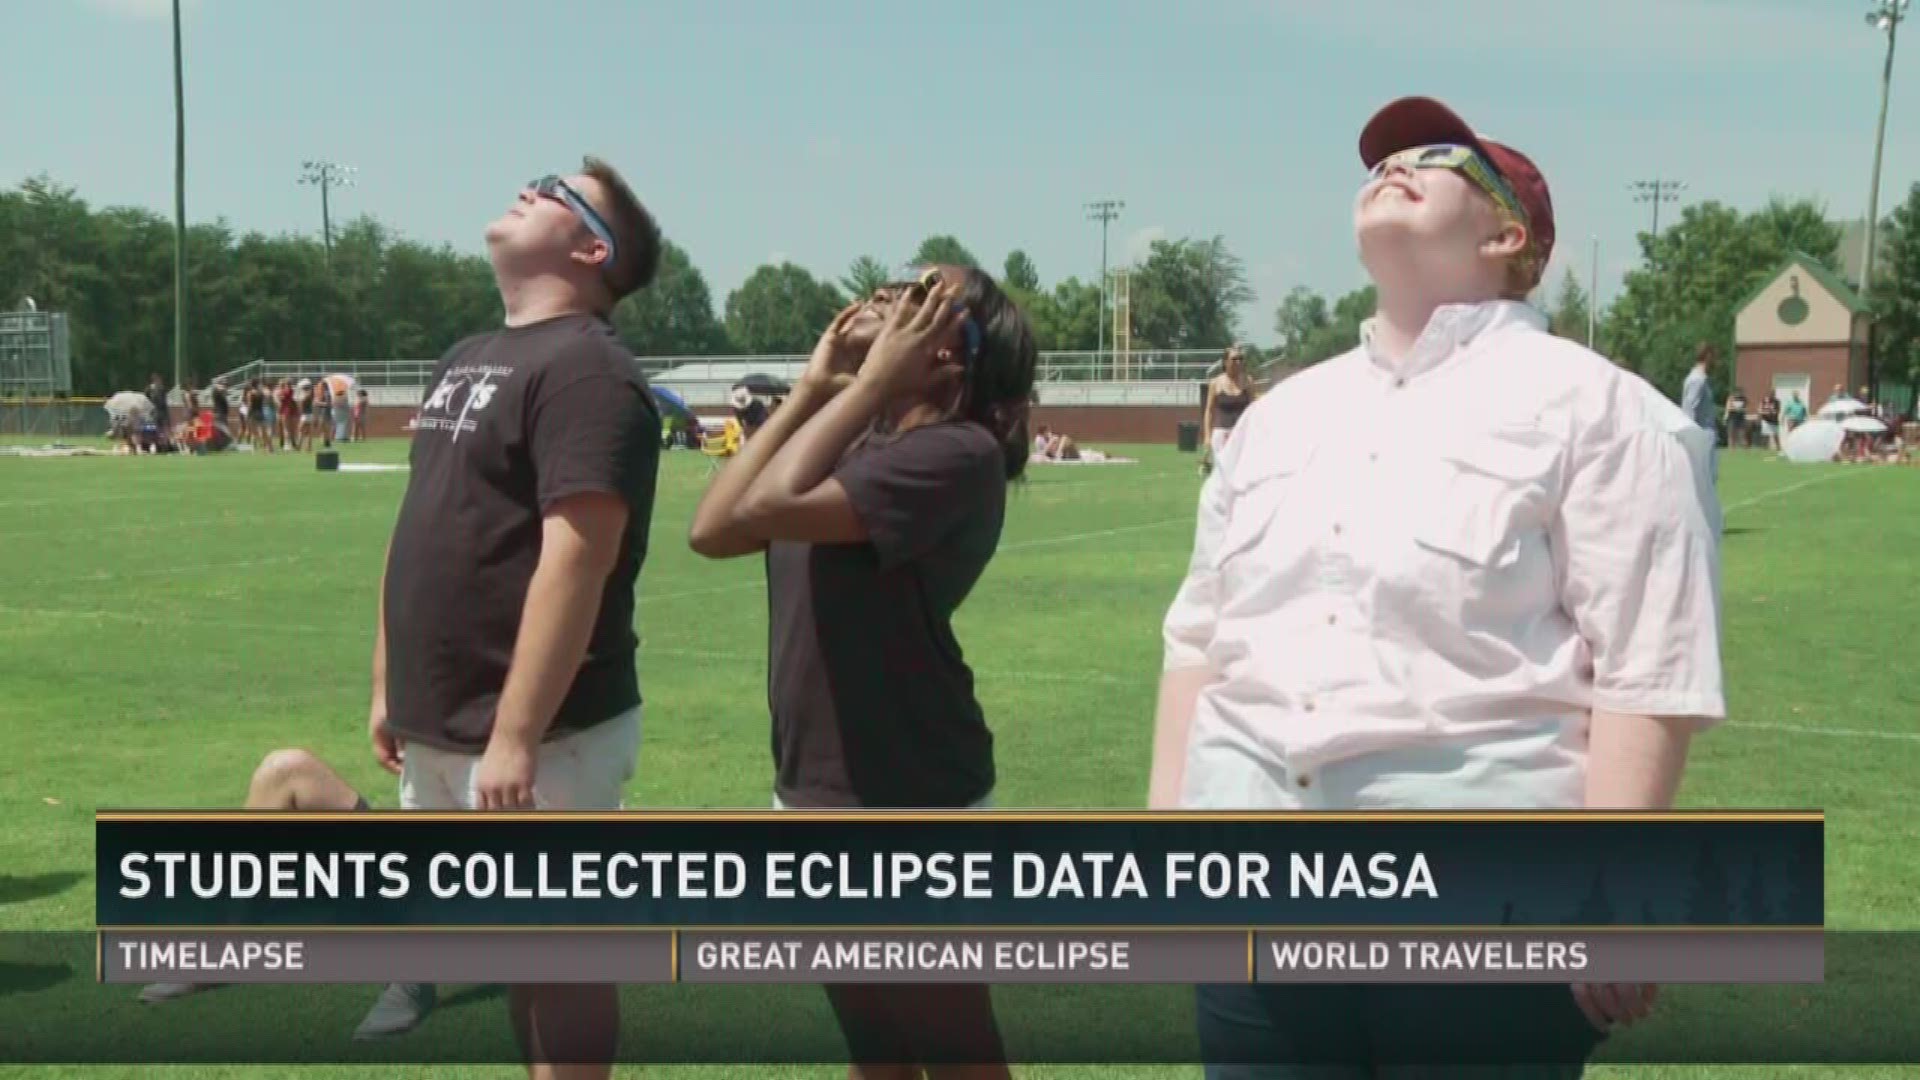 Aug. 21, 2017: Students at Maryville College collected data for NASA during the total solar eclipse.